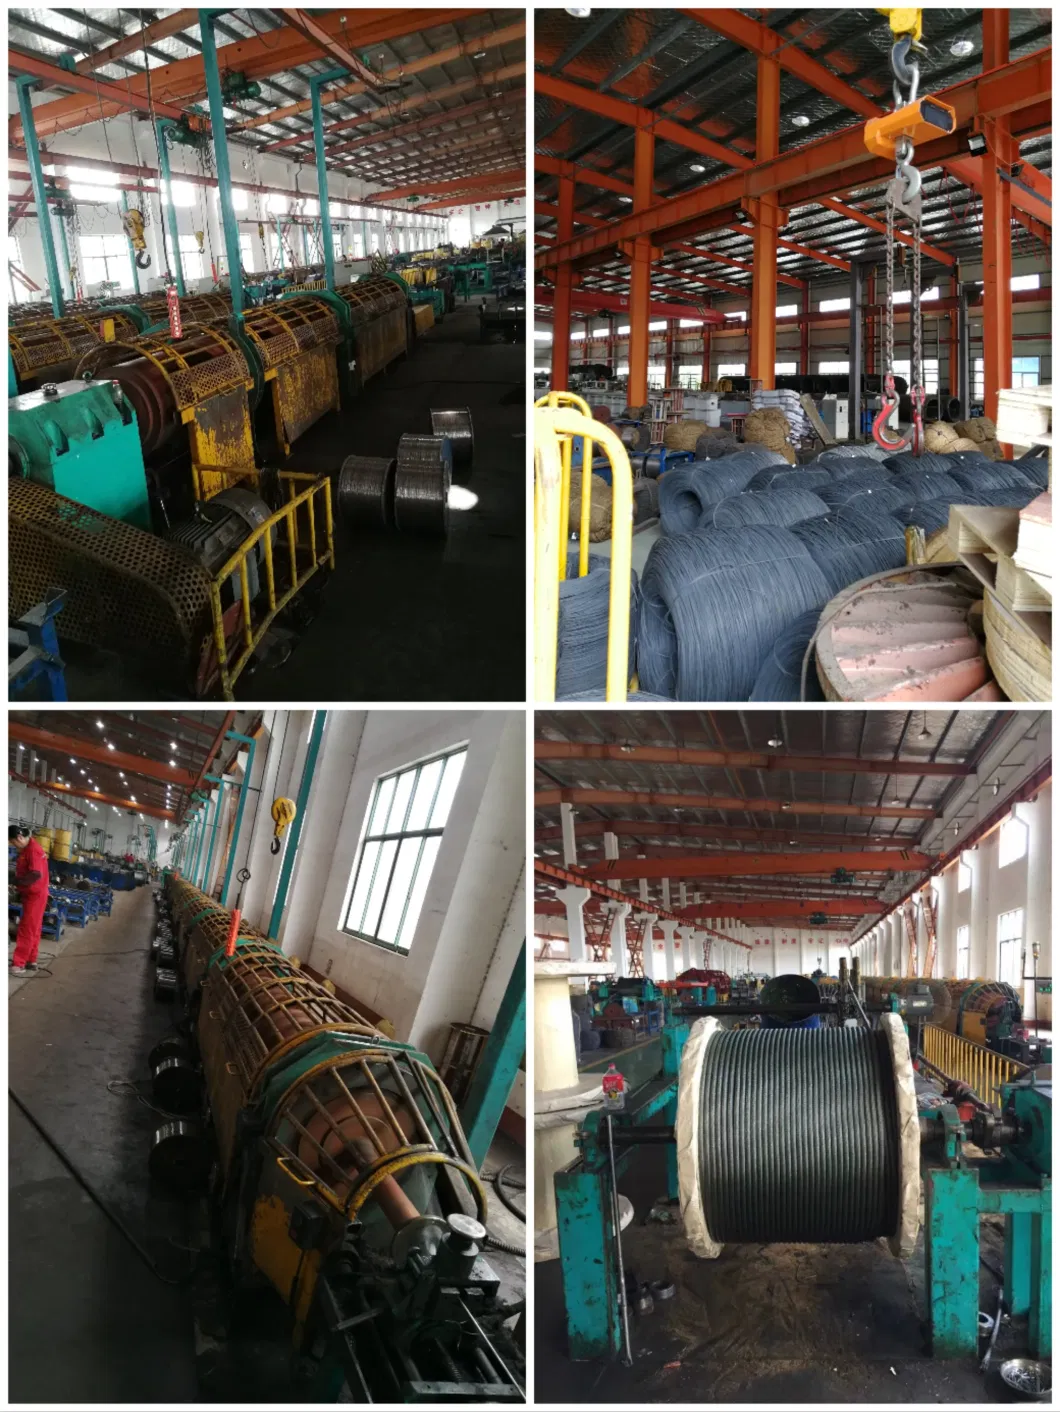 Compacted Steel Wire Rope K35wxk7, Wire Rope 35wxk7, Steel Cable